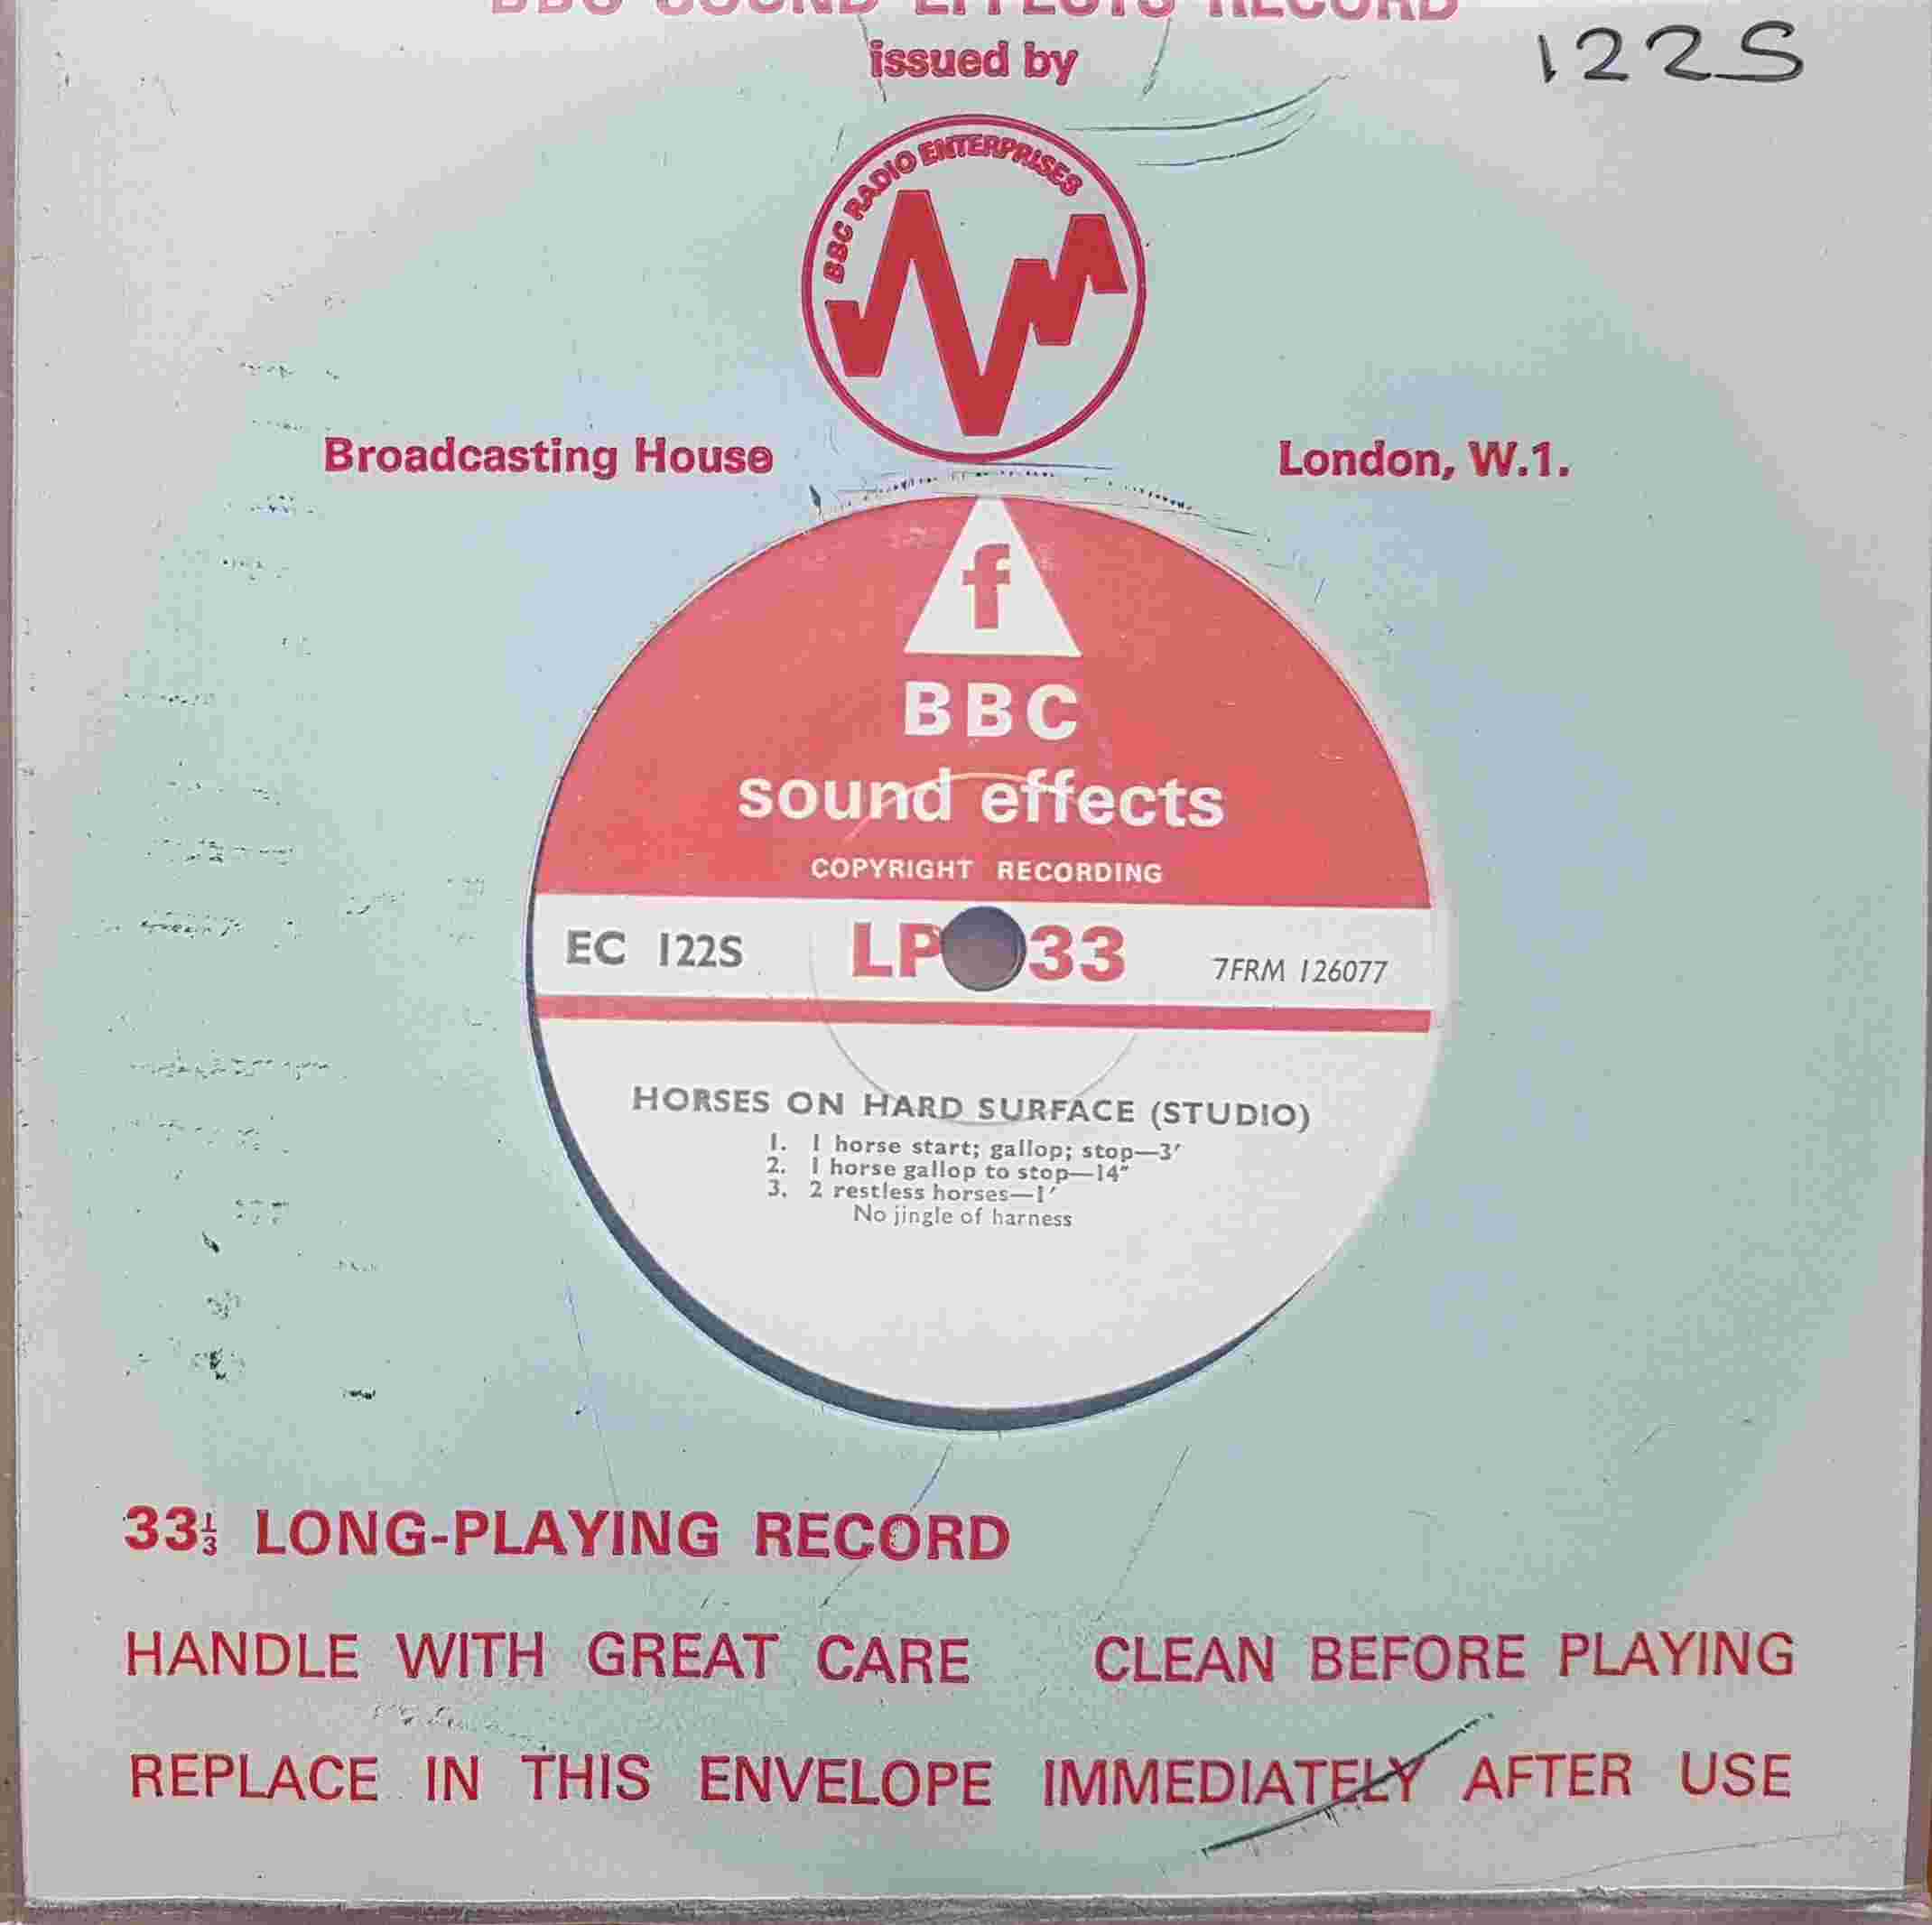 Picture of EC 122S Horse on hard surface (Studio) by artist Not registered from the BBC singles - Records and Tapes library